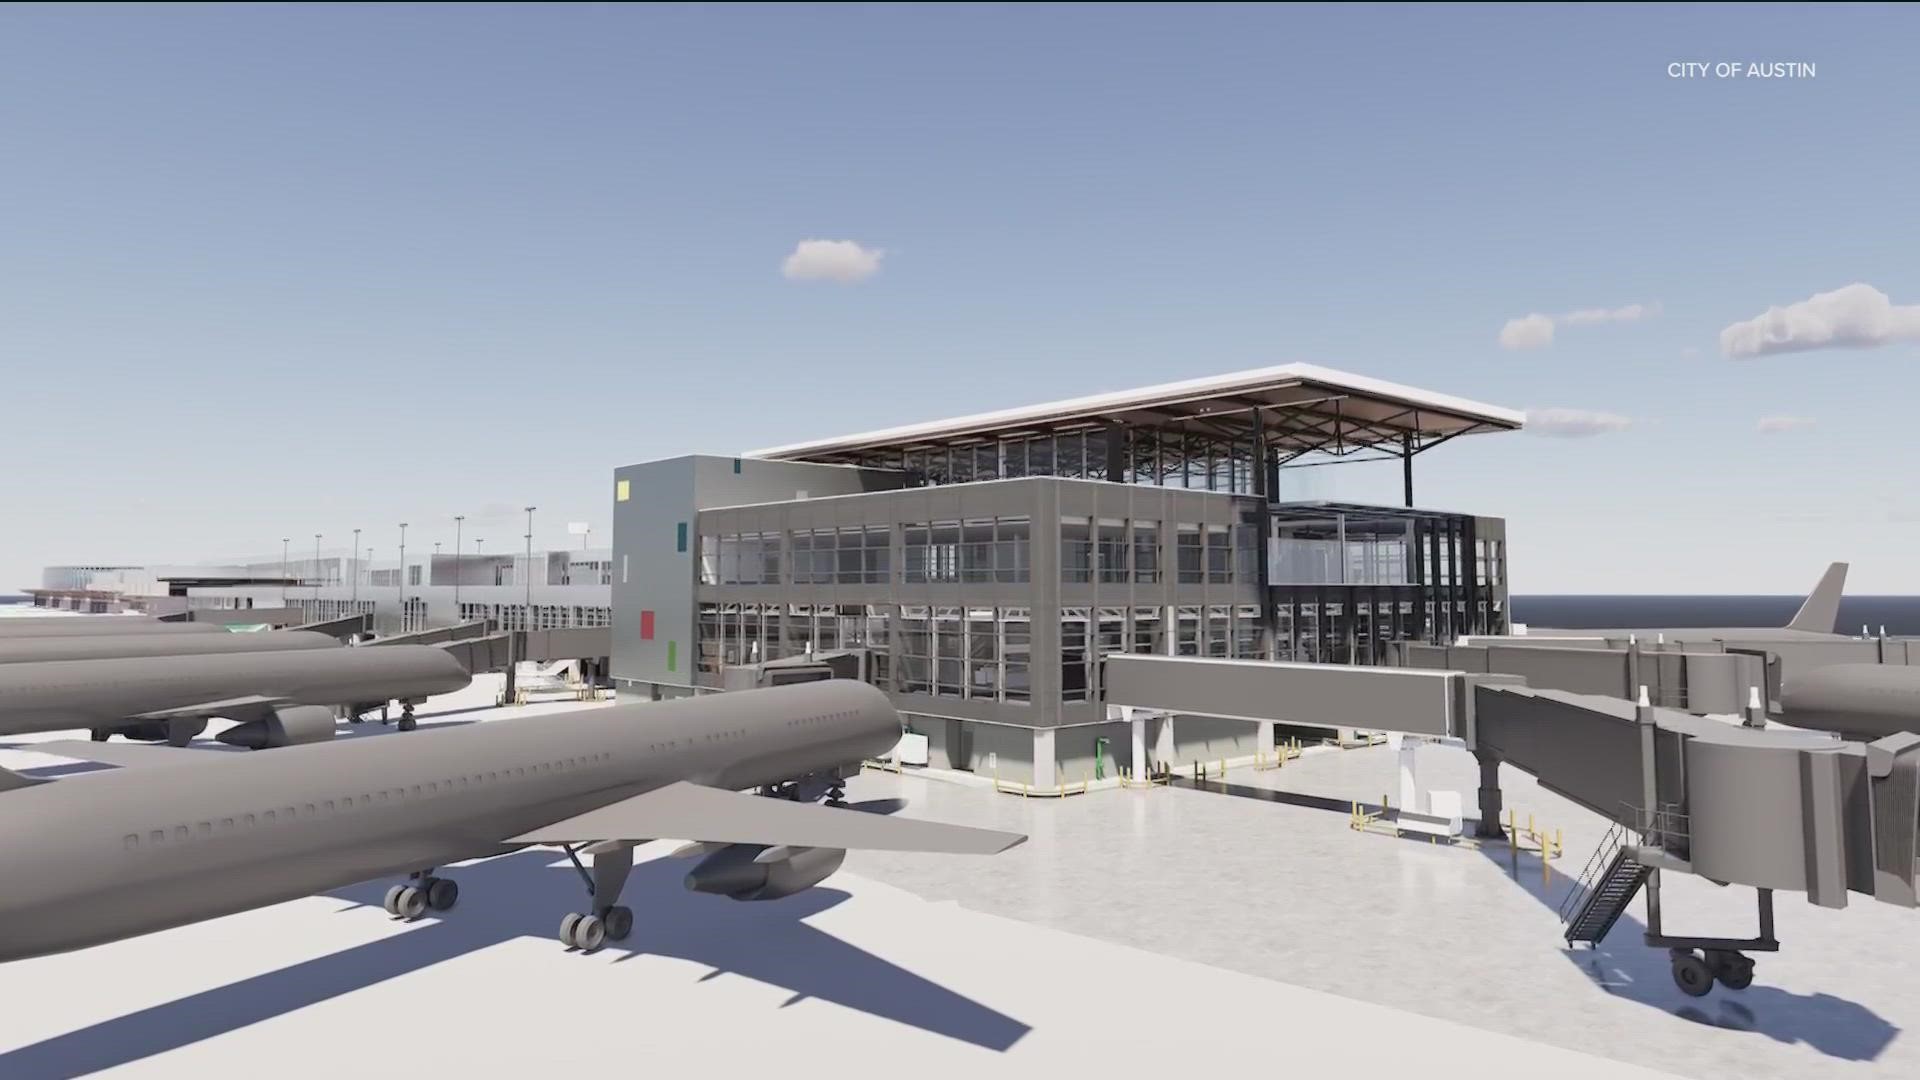 We're getting an idea of what a new terminal at Austin's airport is expected to look like.